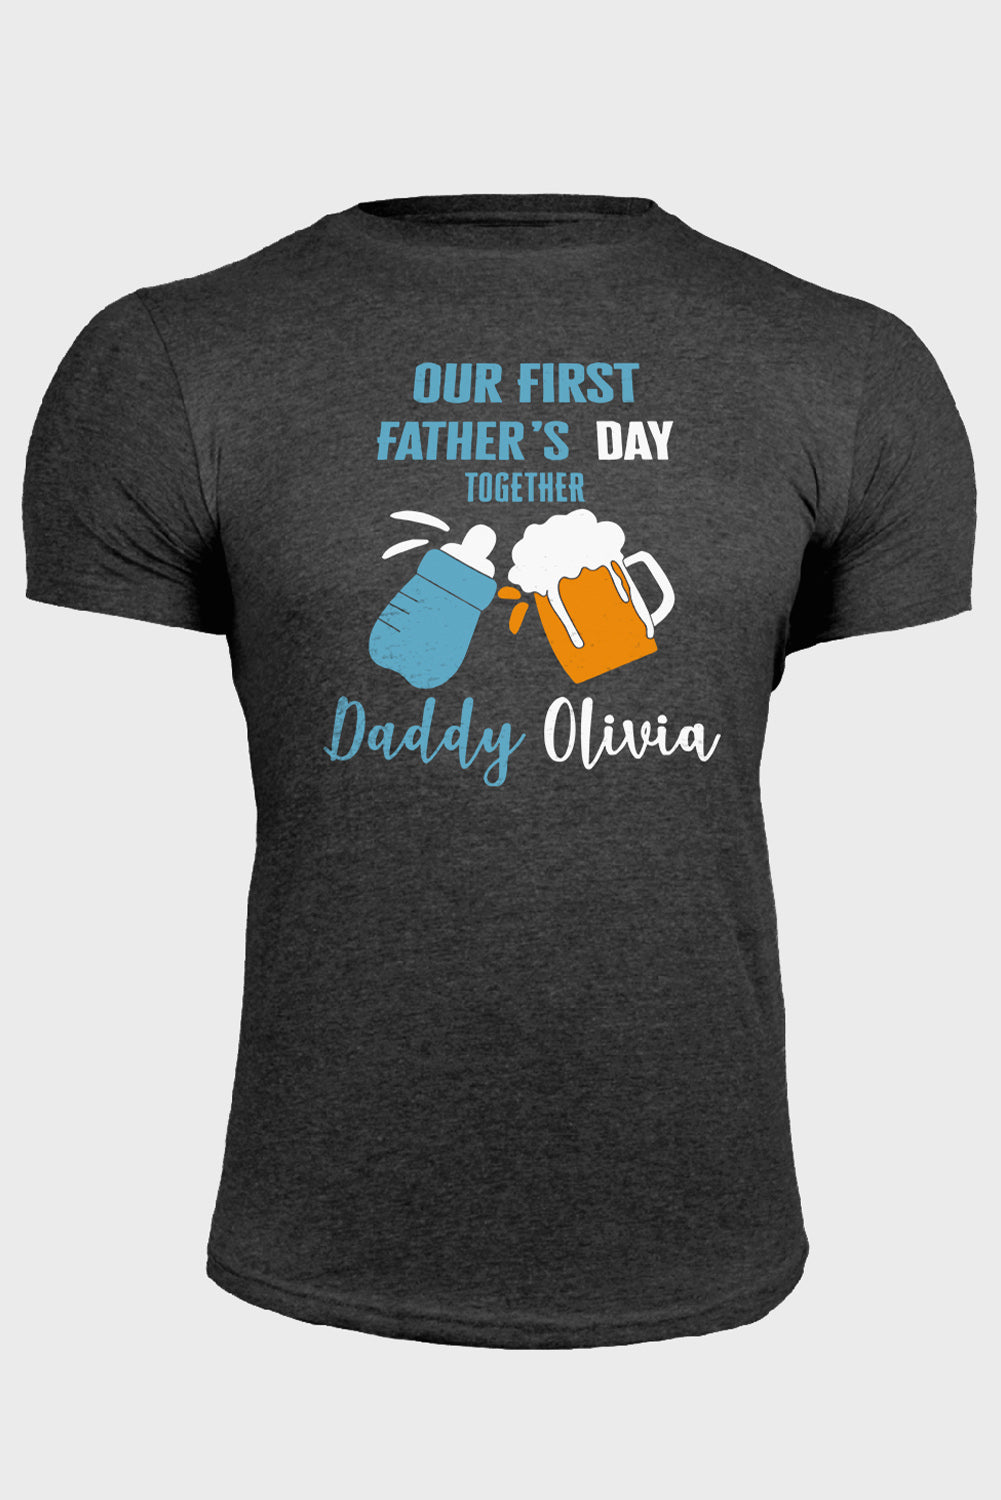 Gray Father's Day Letter Beer Graphic Print Men's T Shirt Gray 62%Polyester+32%Cotton+6%Elastane Men's Tops JT's Designer Fashion